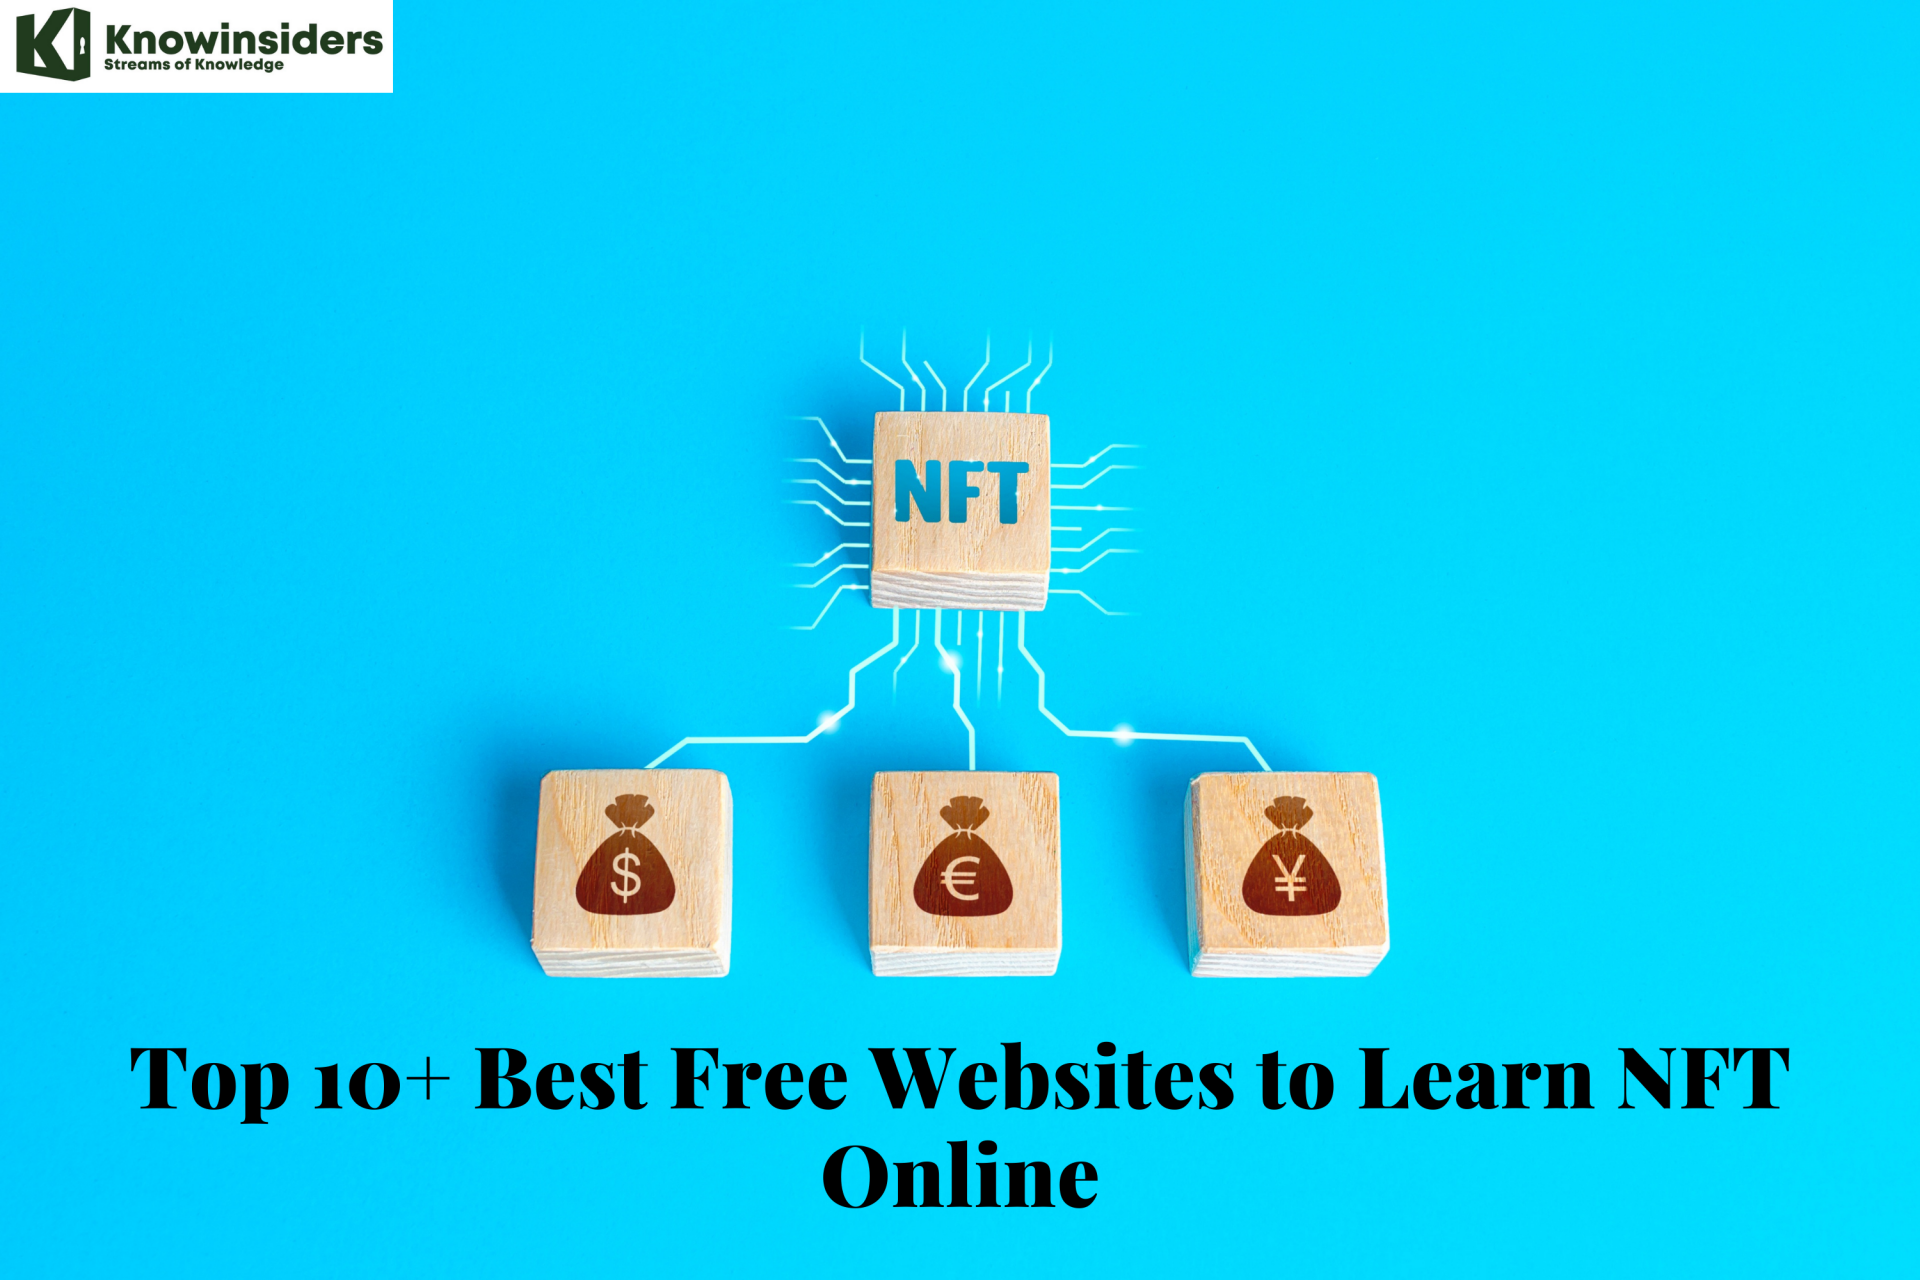 Top 10+ Best Free Websites to Learn NFT Online and Earn Money Right Now